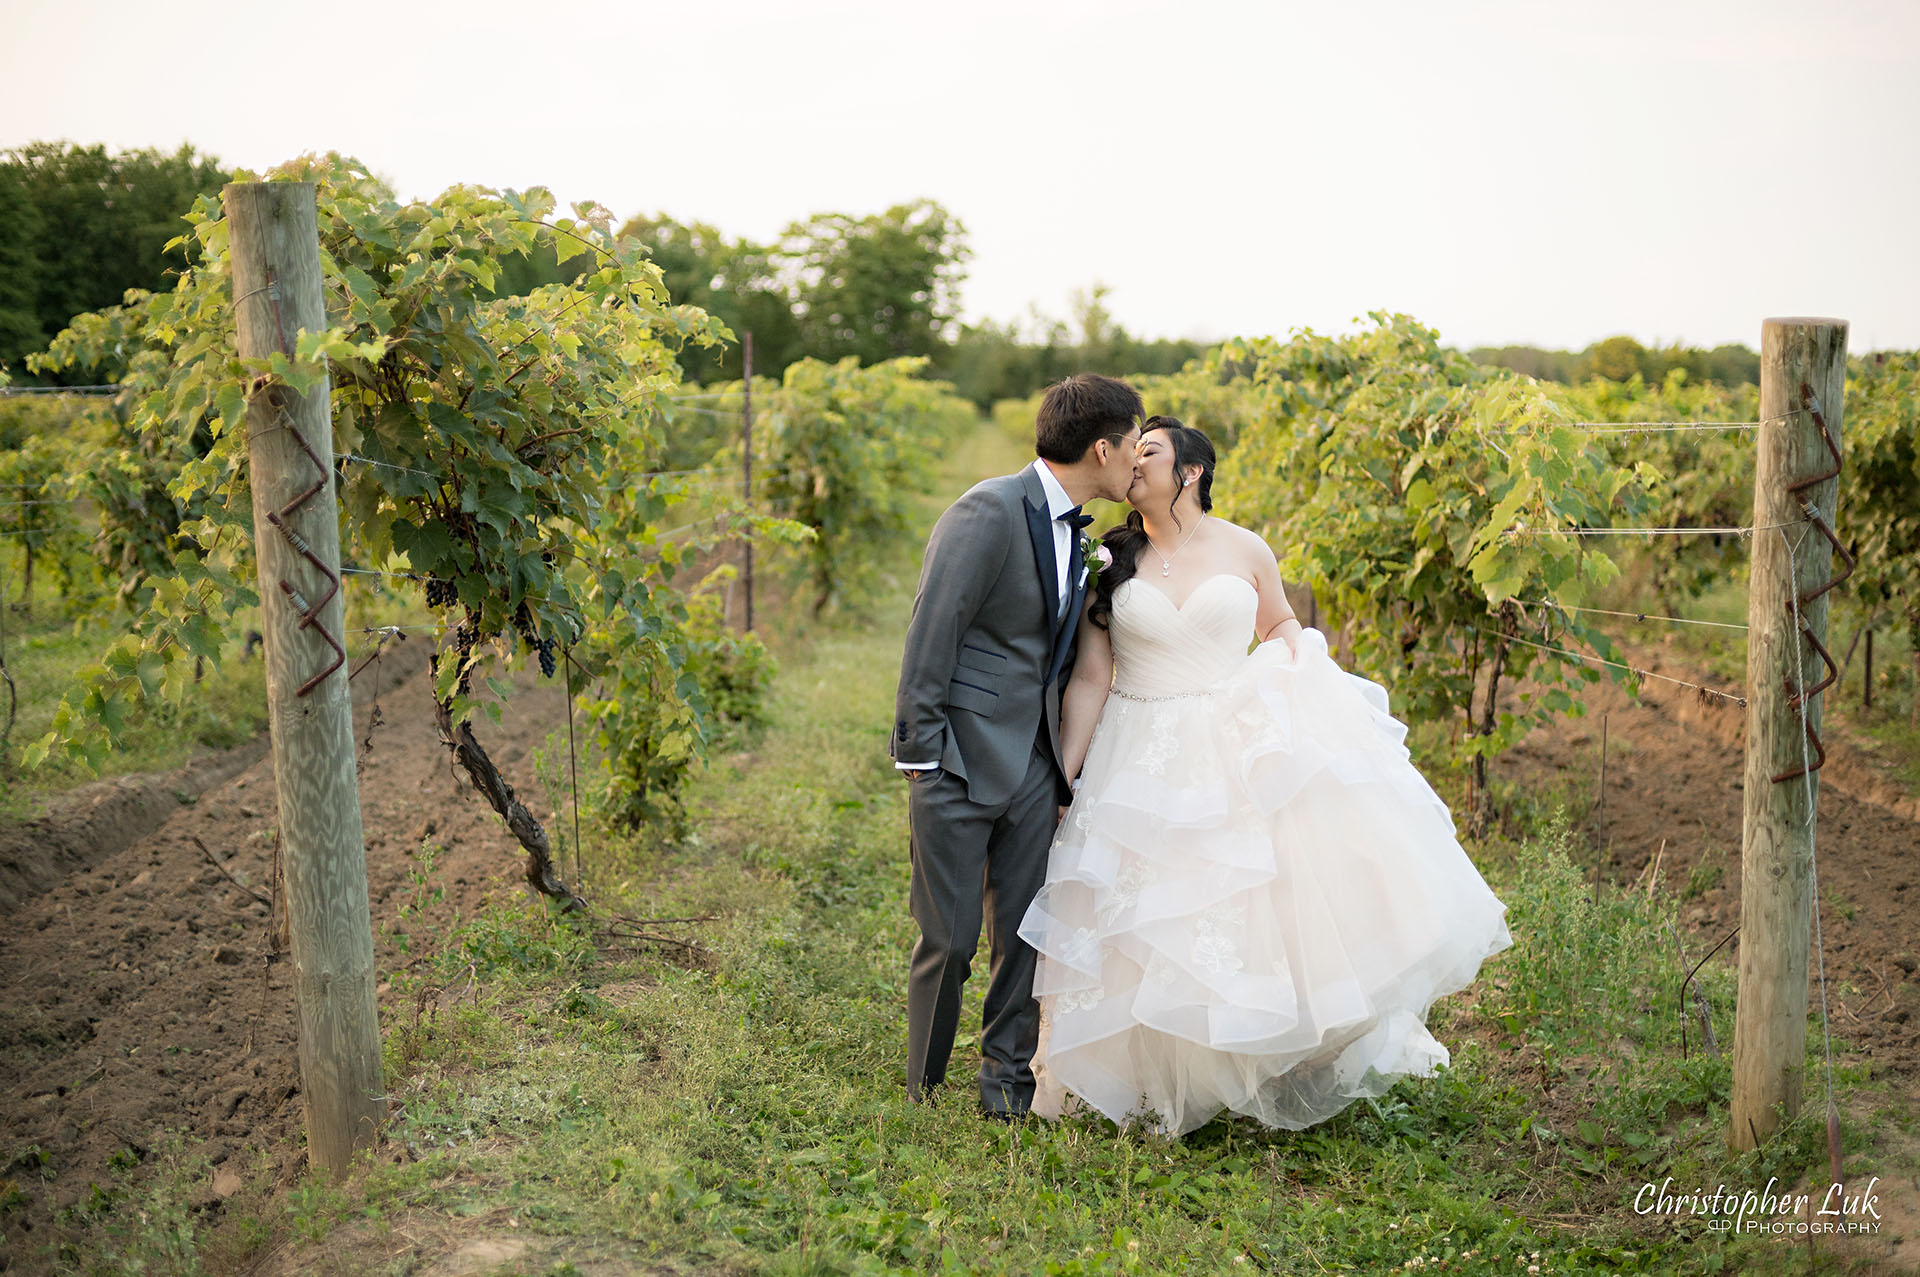 Willow Springs Winery Bride Groom Candid Natural Photojournalistic Vineyard Rows of Grape Vines Holding Hands Walking Together Landscape